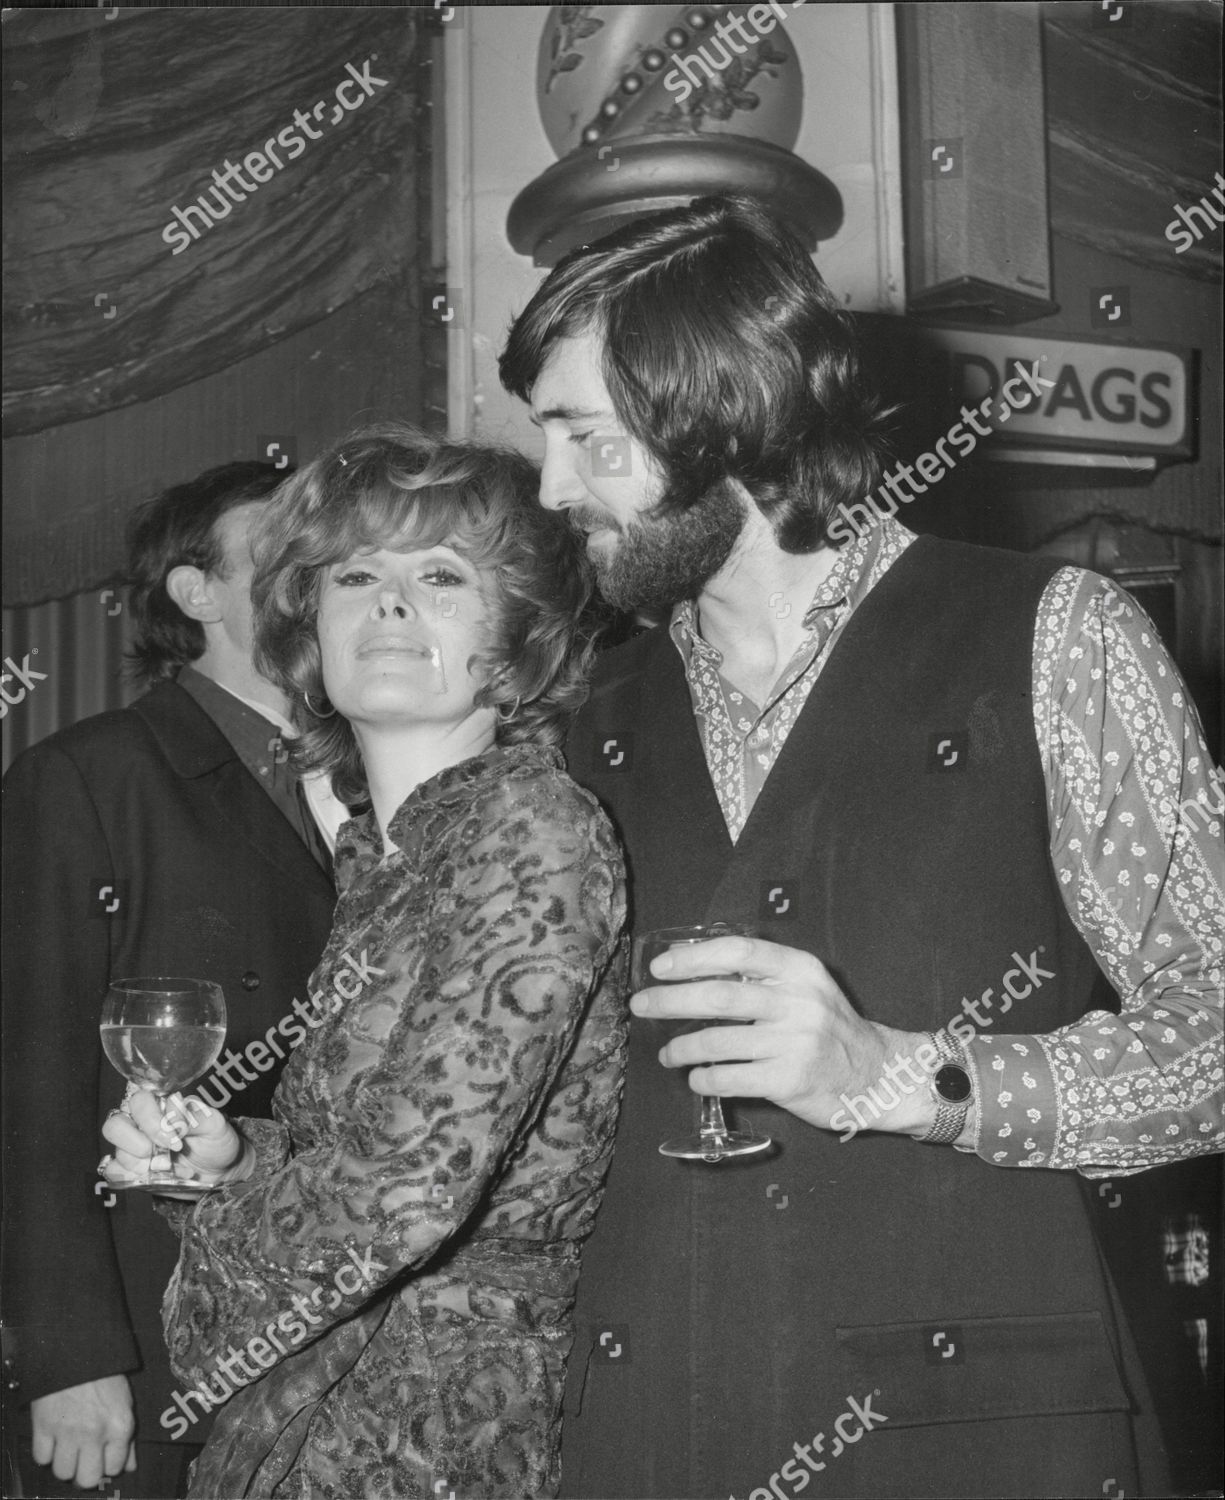 actors-jill-st-john-and-george-lazenby-at-the-weekend-mail-ball-1970-shutterstock-editorial-1567972a.jpg